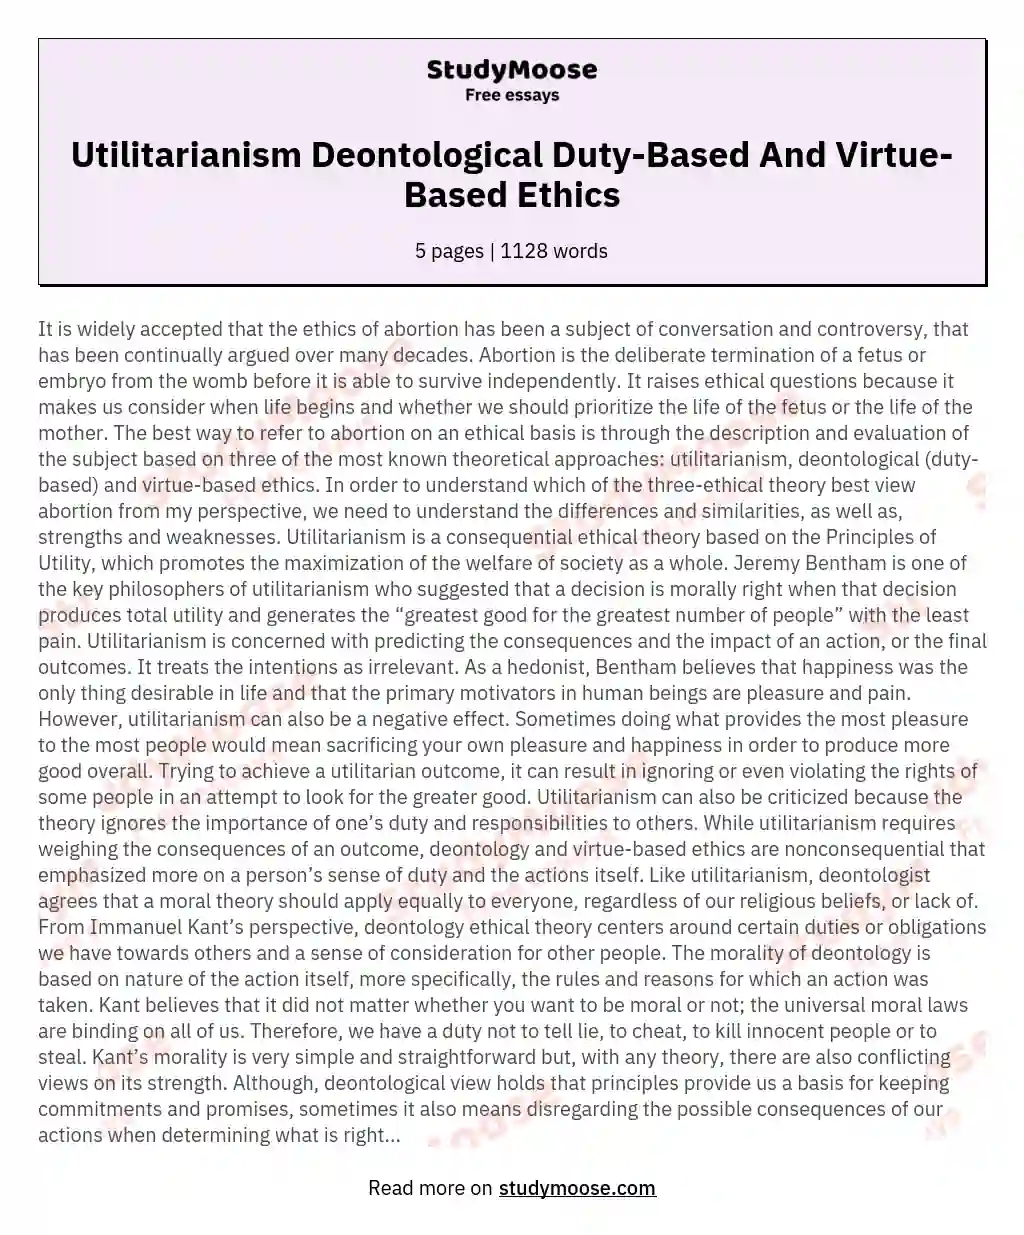 Utilitarianism Deontological Duty-Based And Virtue-Based Ethics essay